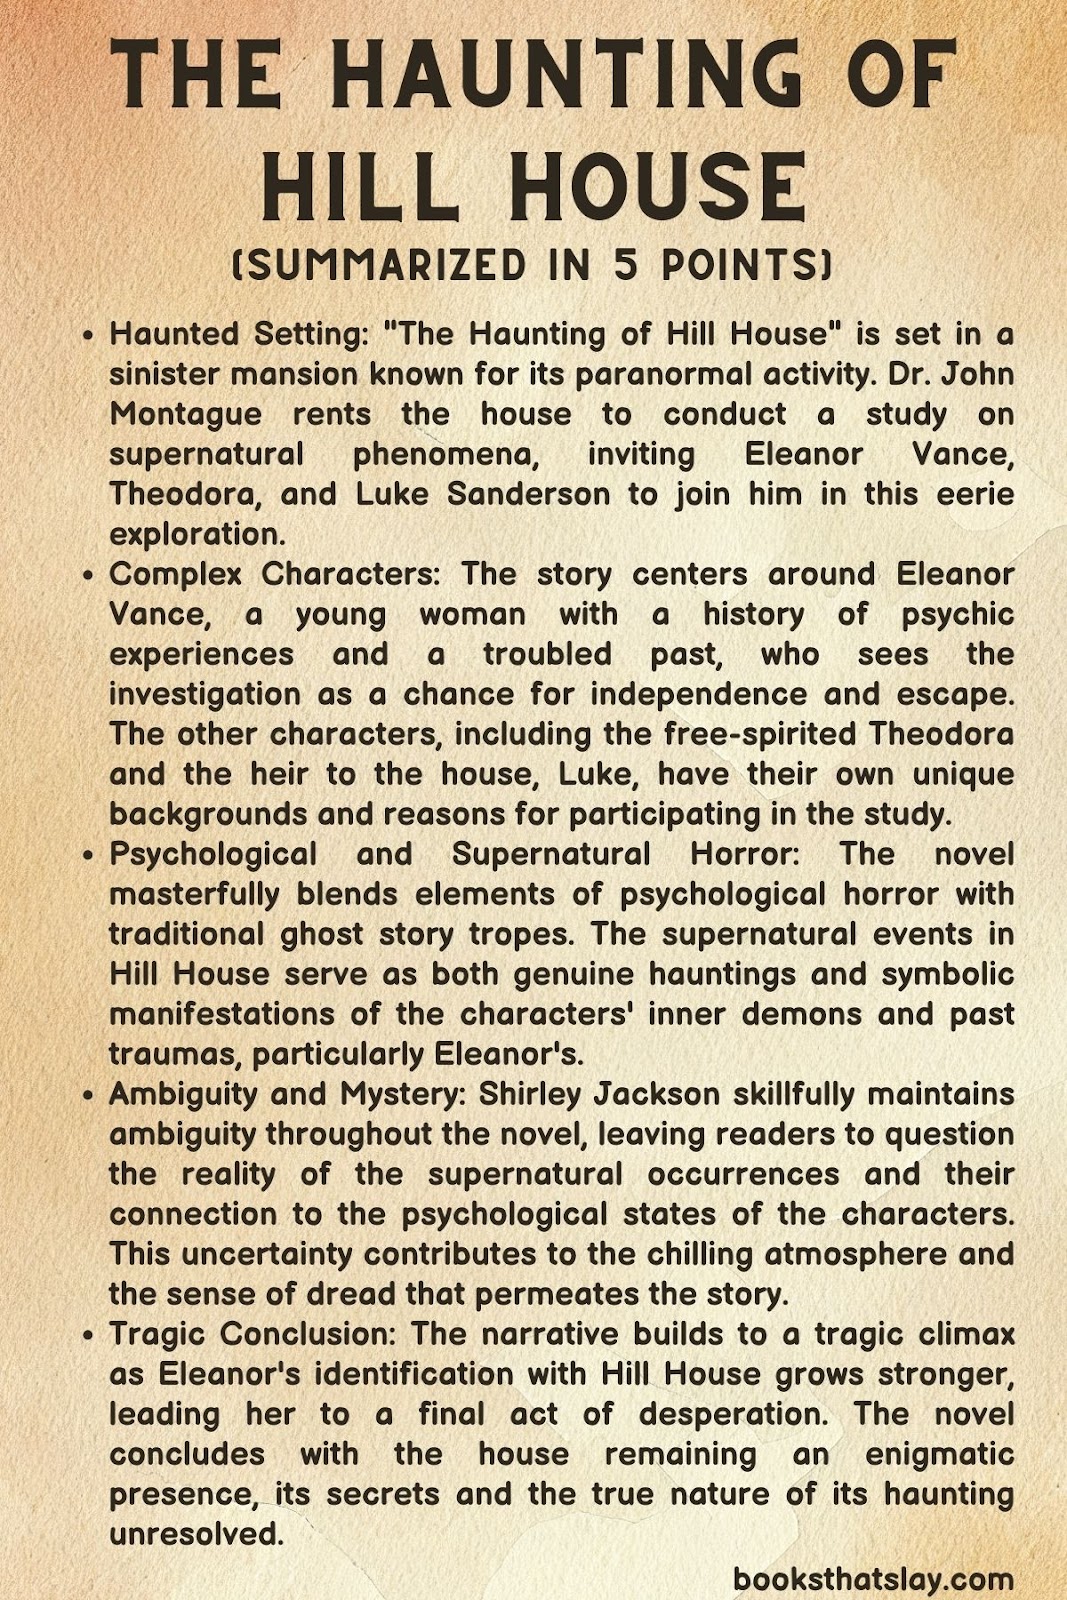 The Haunting Of Hill House Summary